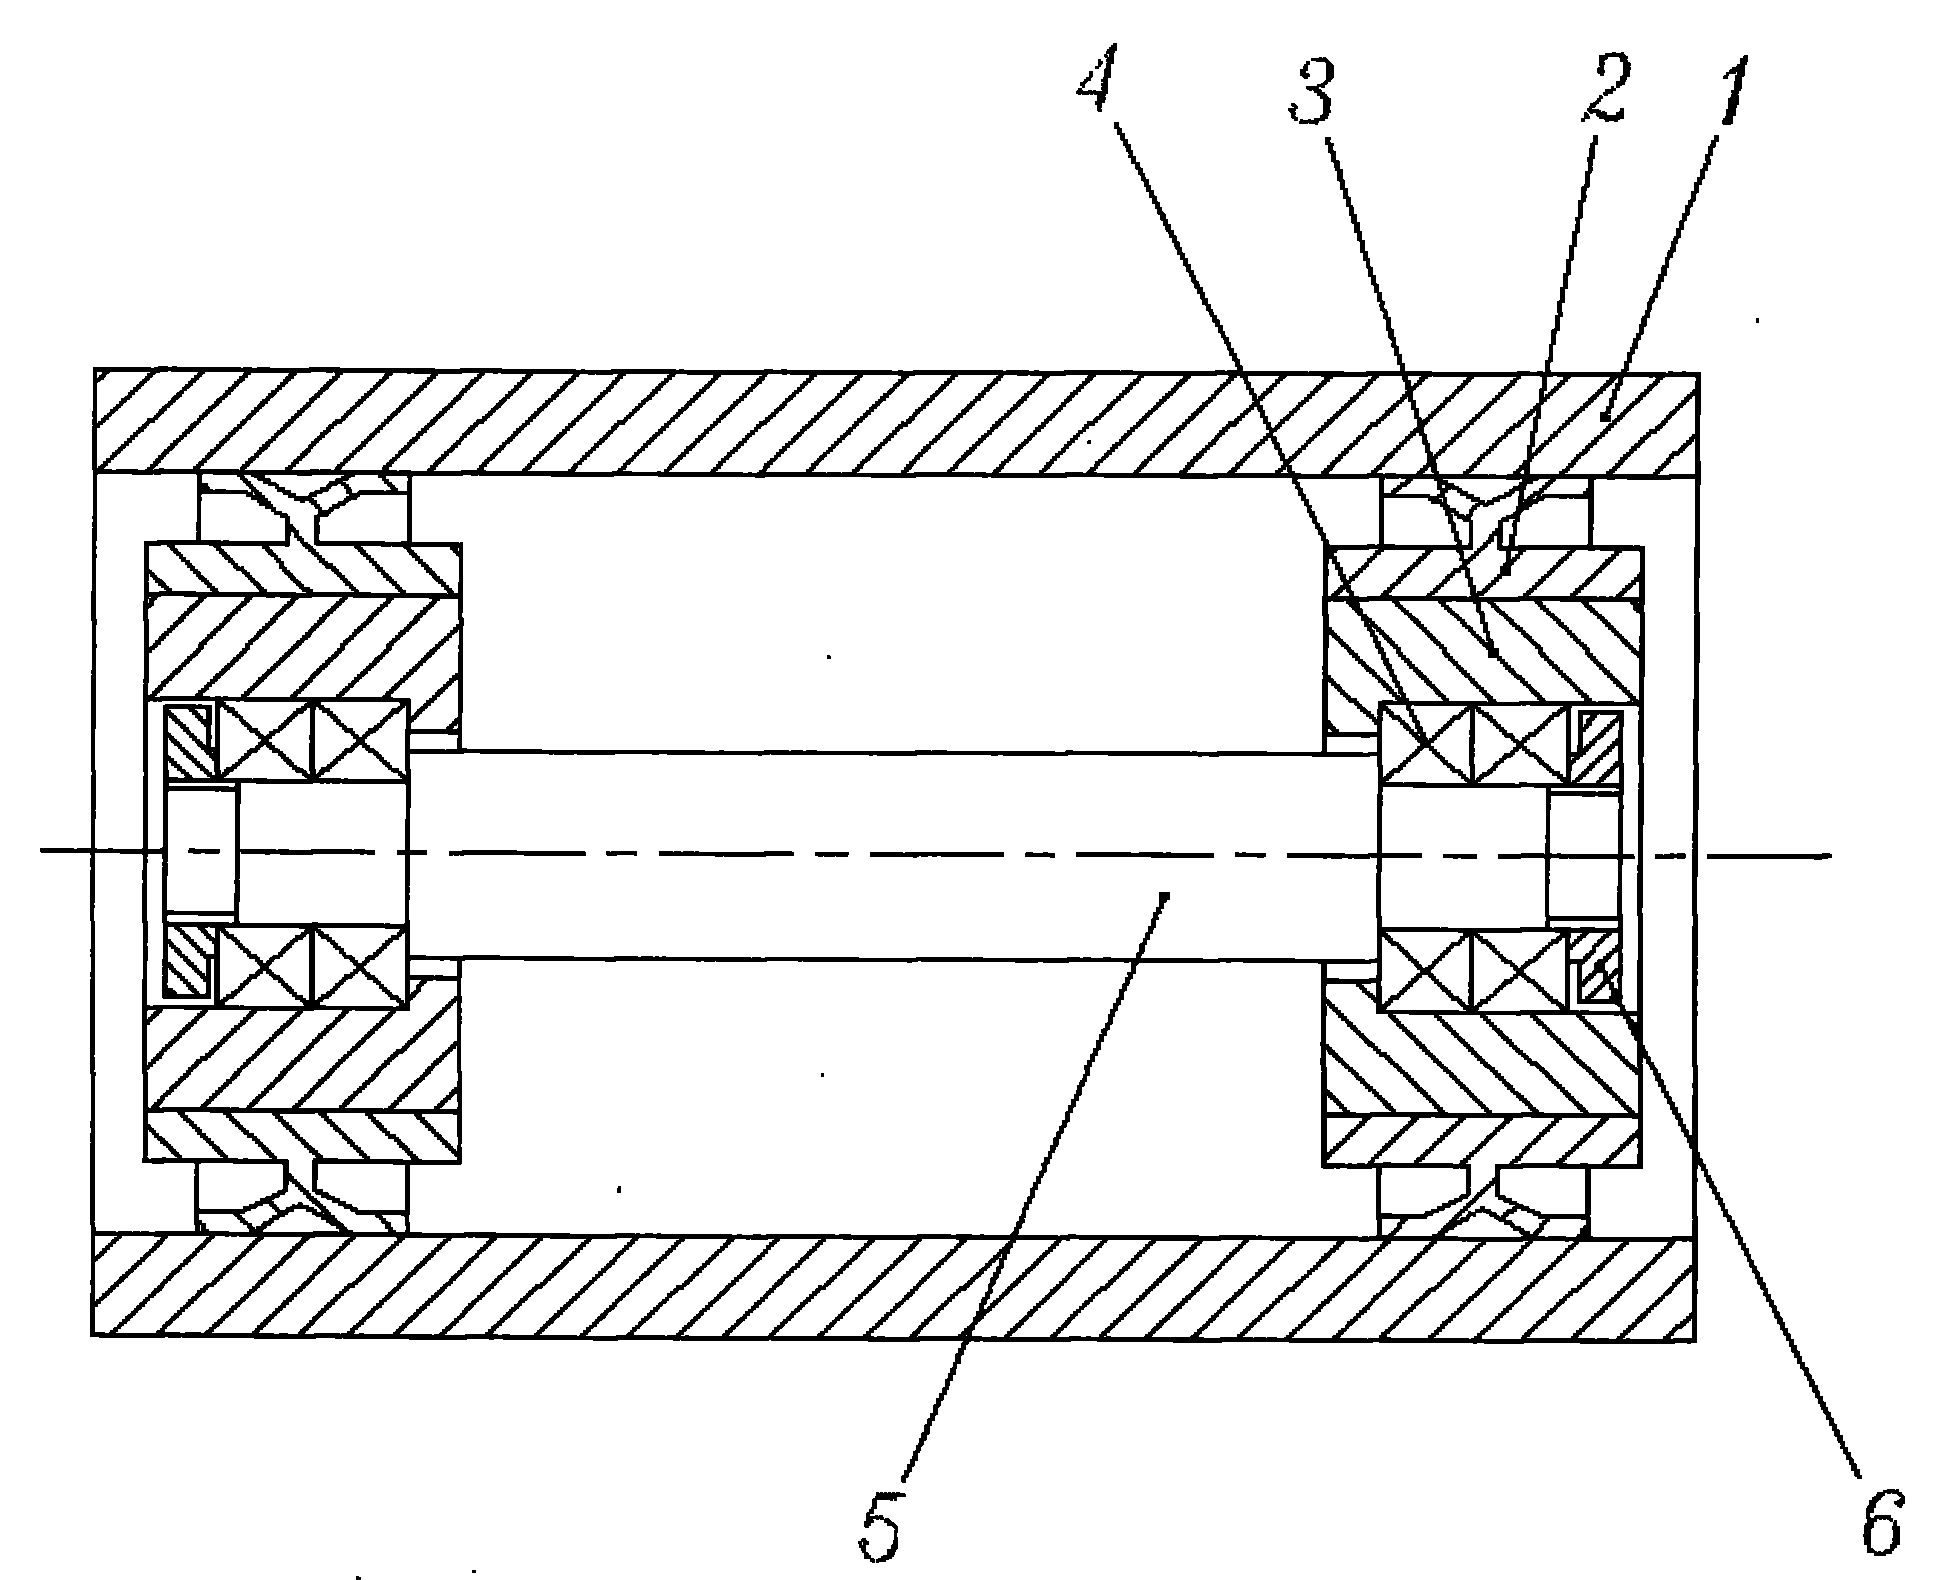 Method for reducing vibration or bending deformation of spindle rotor in high-speed electric spindle